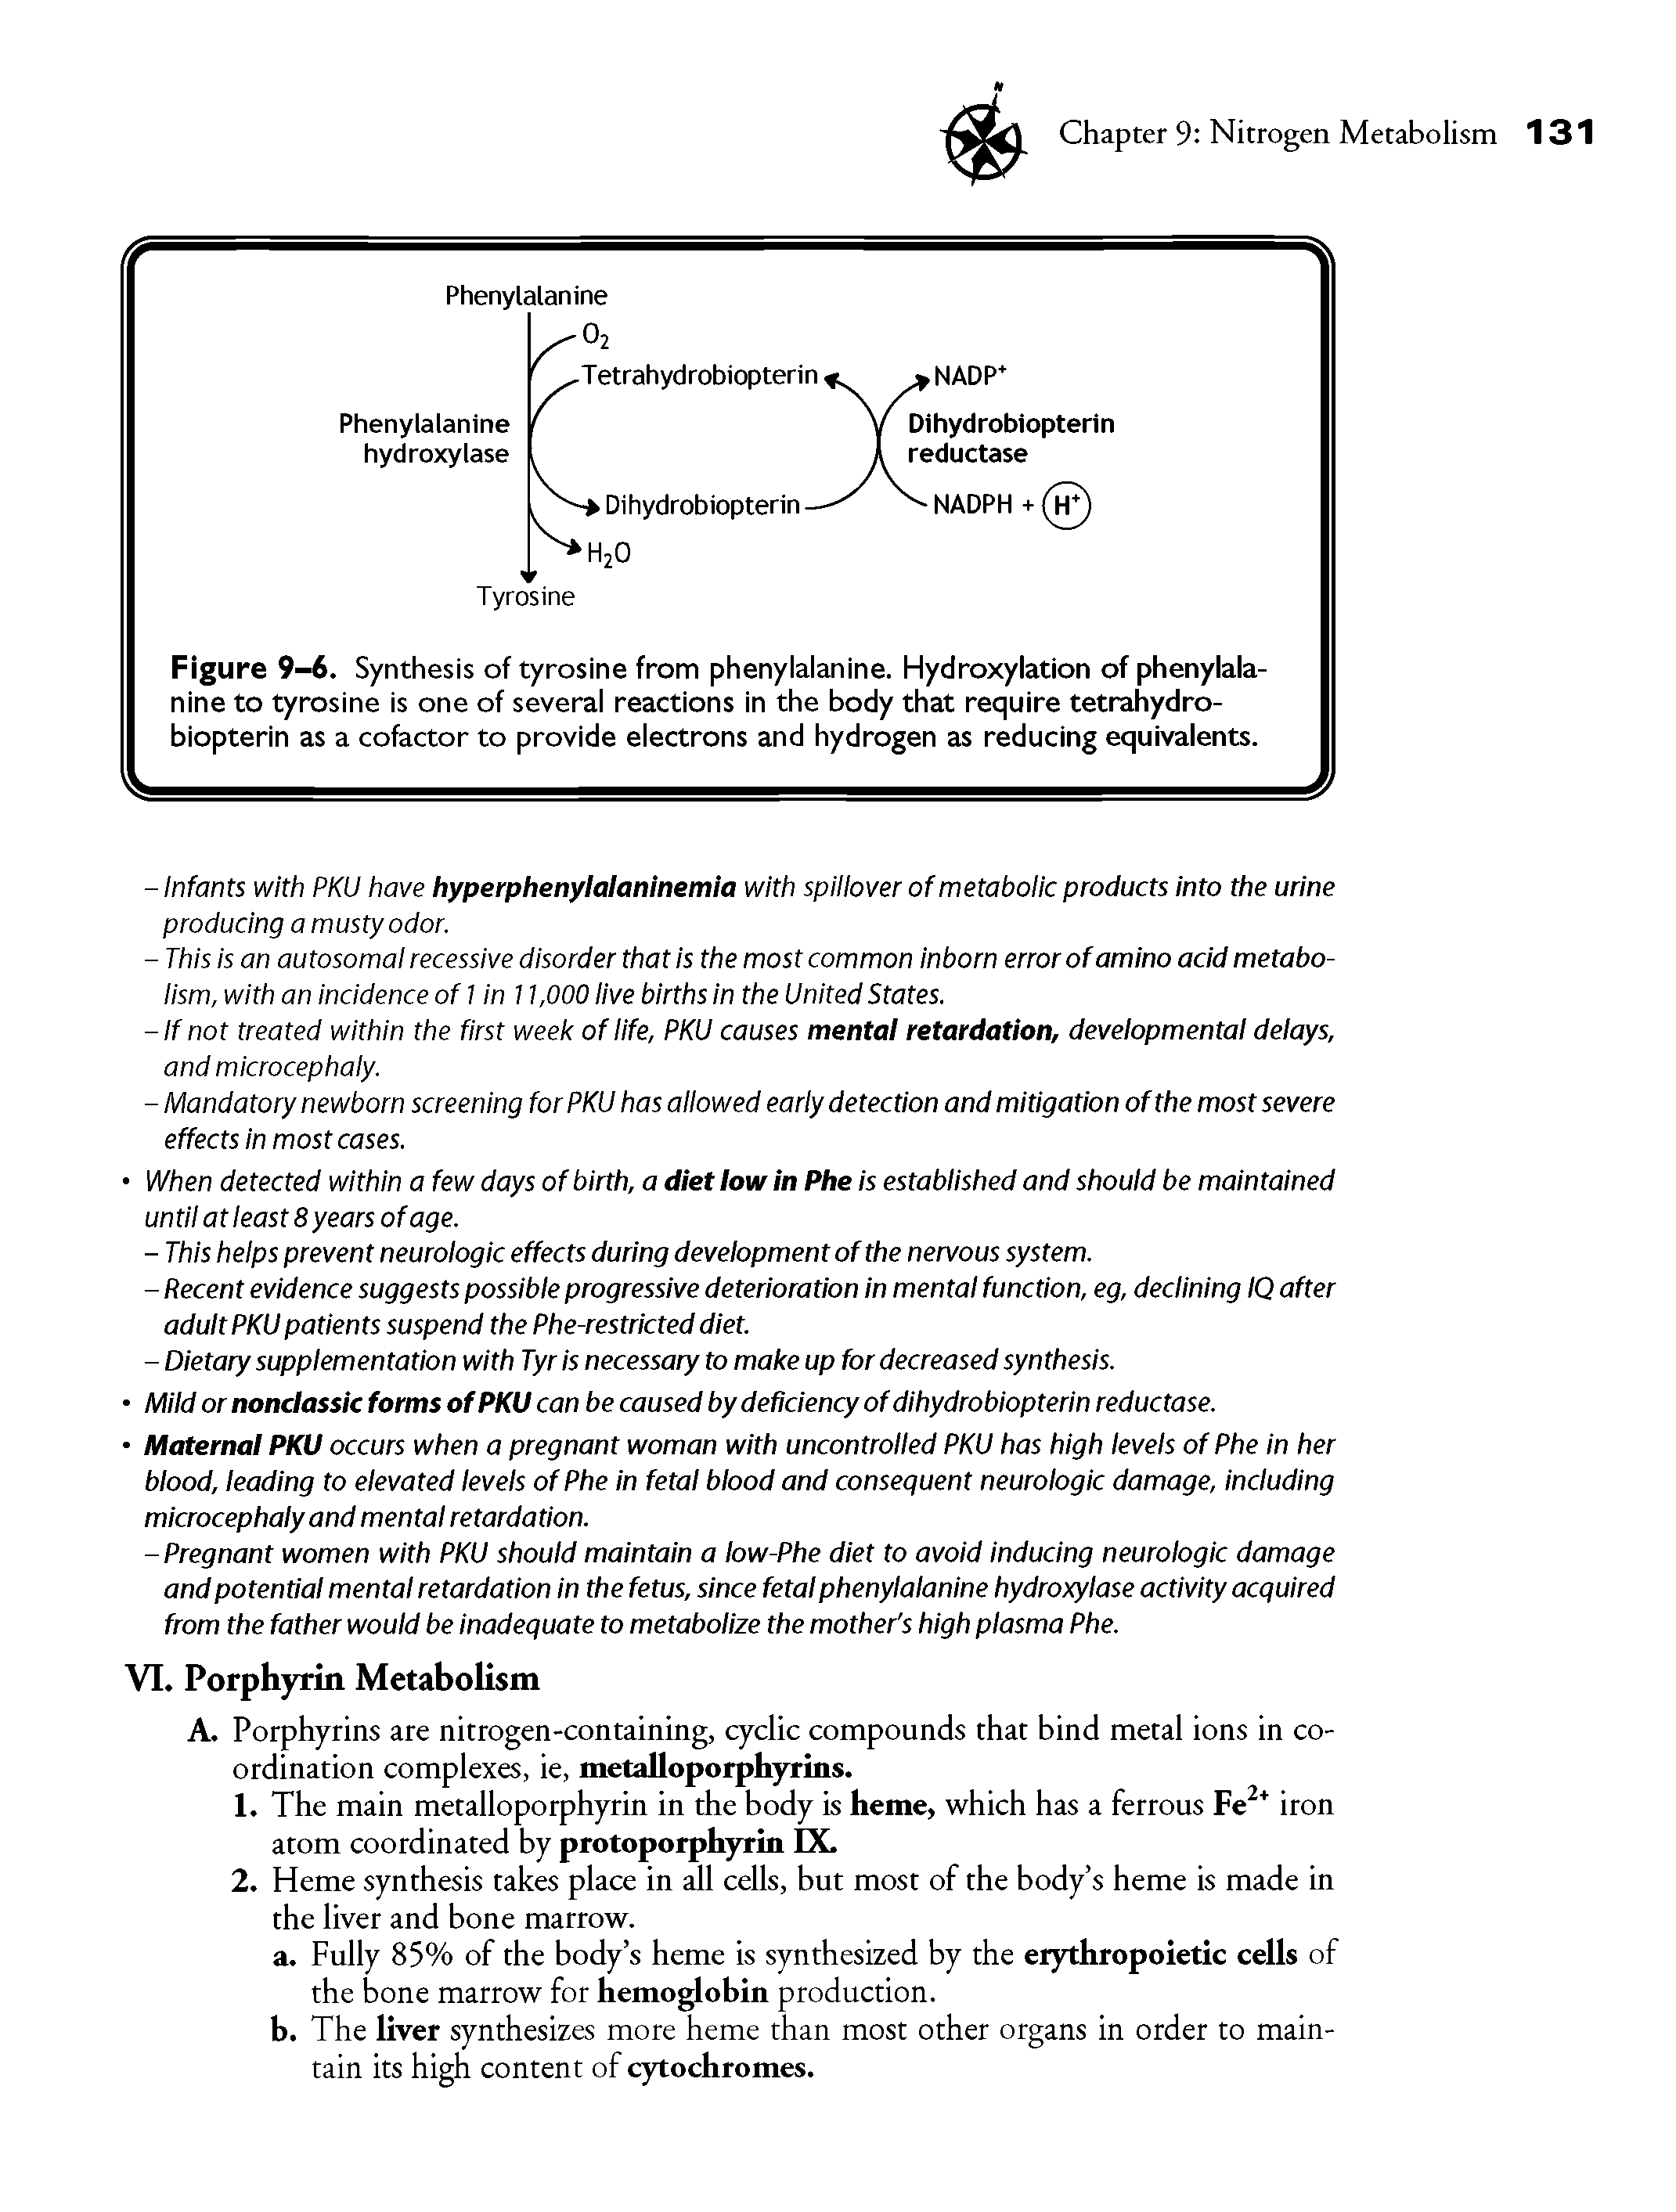 Figure 9-6. Synthesis of tyrosine from phenylalanine. Hydroxylation of phenylalanine to tyrosine is one of several reactions in the body that require tetrahydrobiopterin as a cofactor to provide electrons and hydrogen as reducing equivalents.